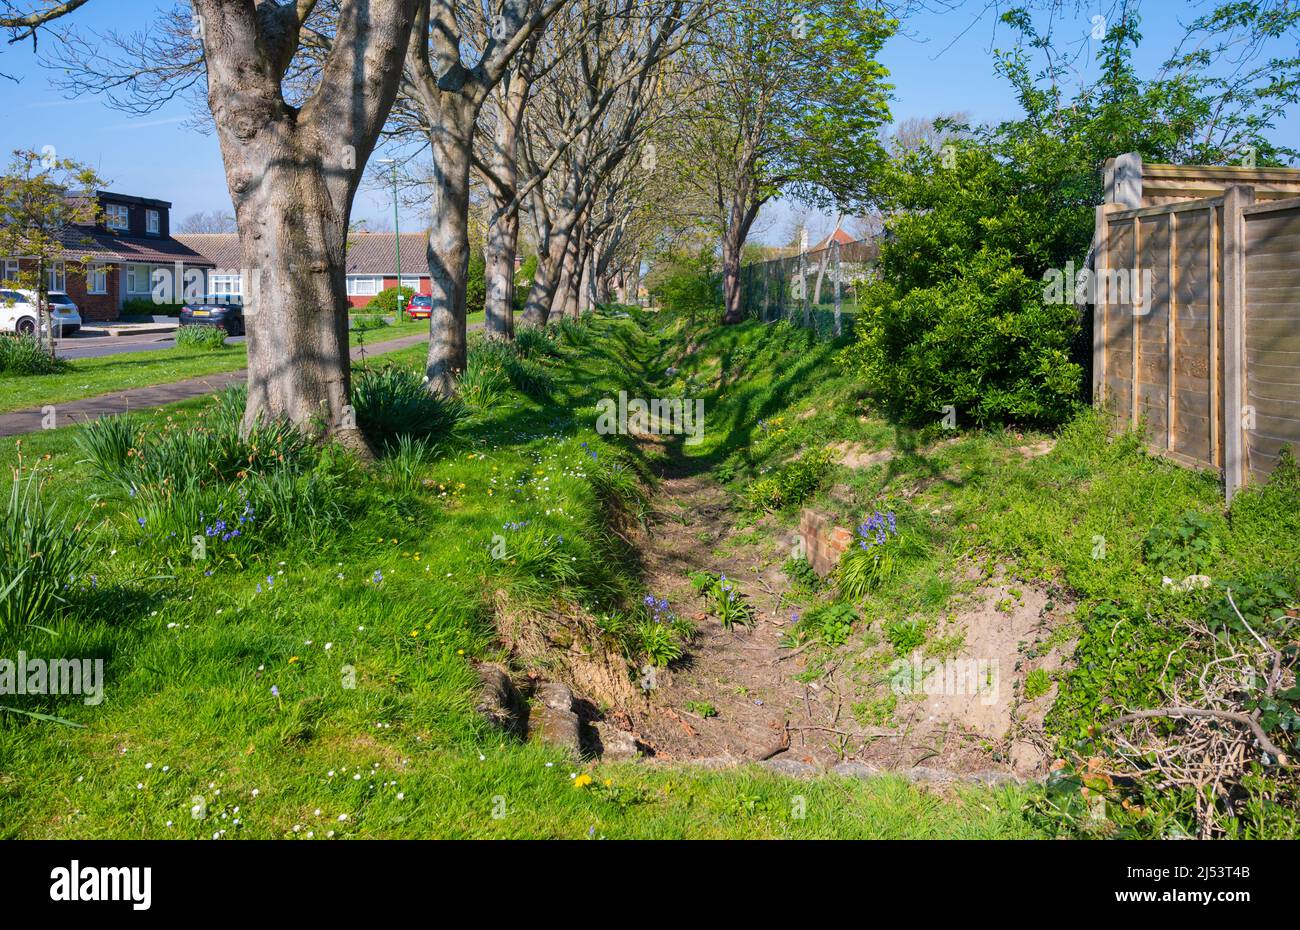 Two Acres, a small copse (a small wood) with a water drainage ditch alongside in Spring in East Preston, West Sussex, England, UK. Stock Photo